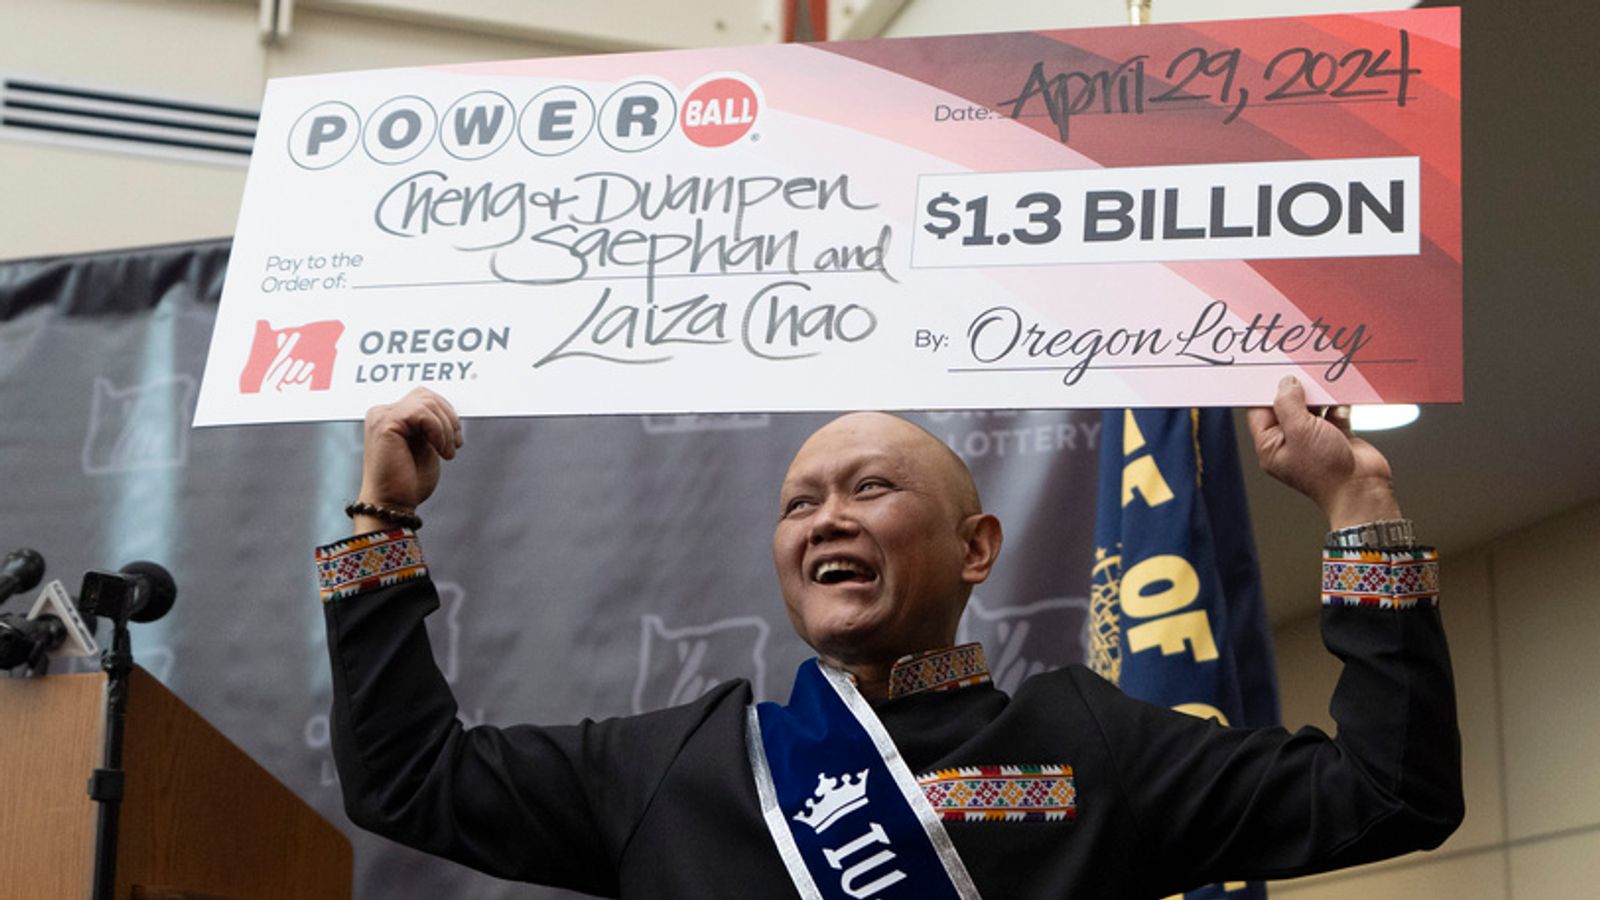 Powerball winner with cancer plans to use jackpot to find good doctor